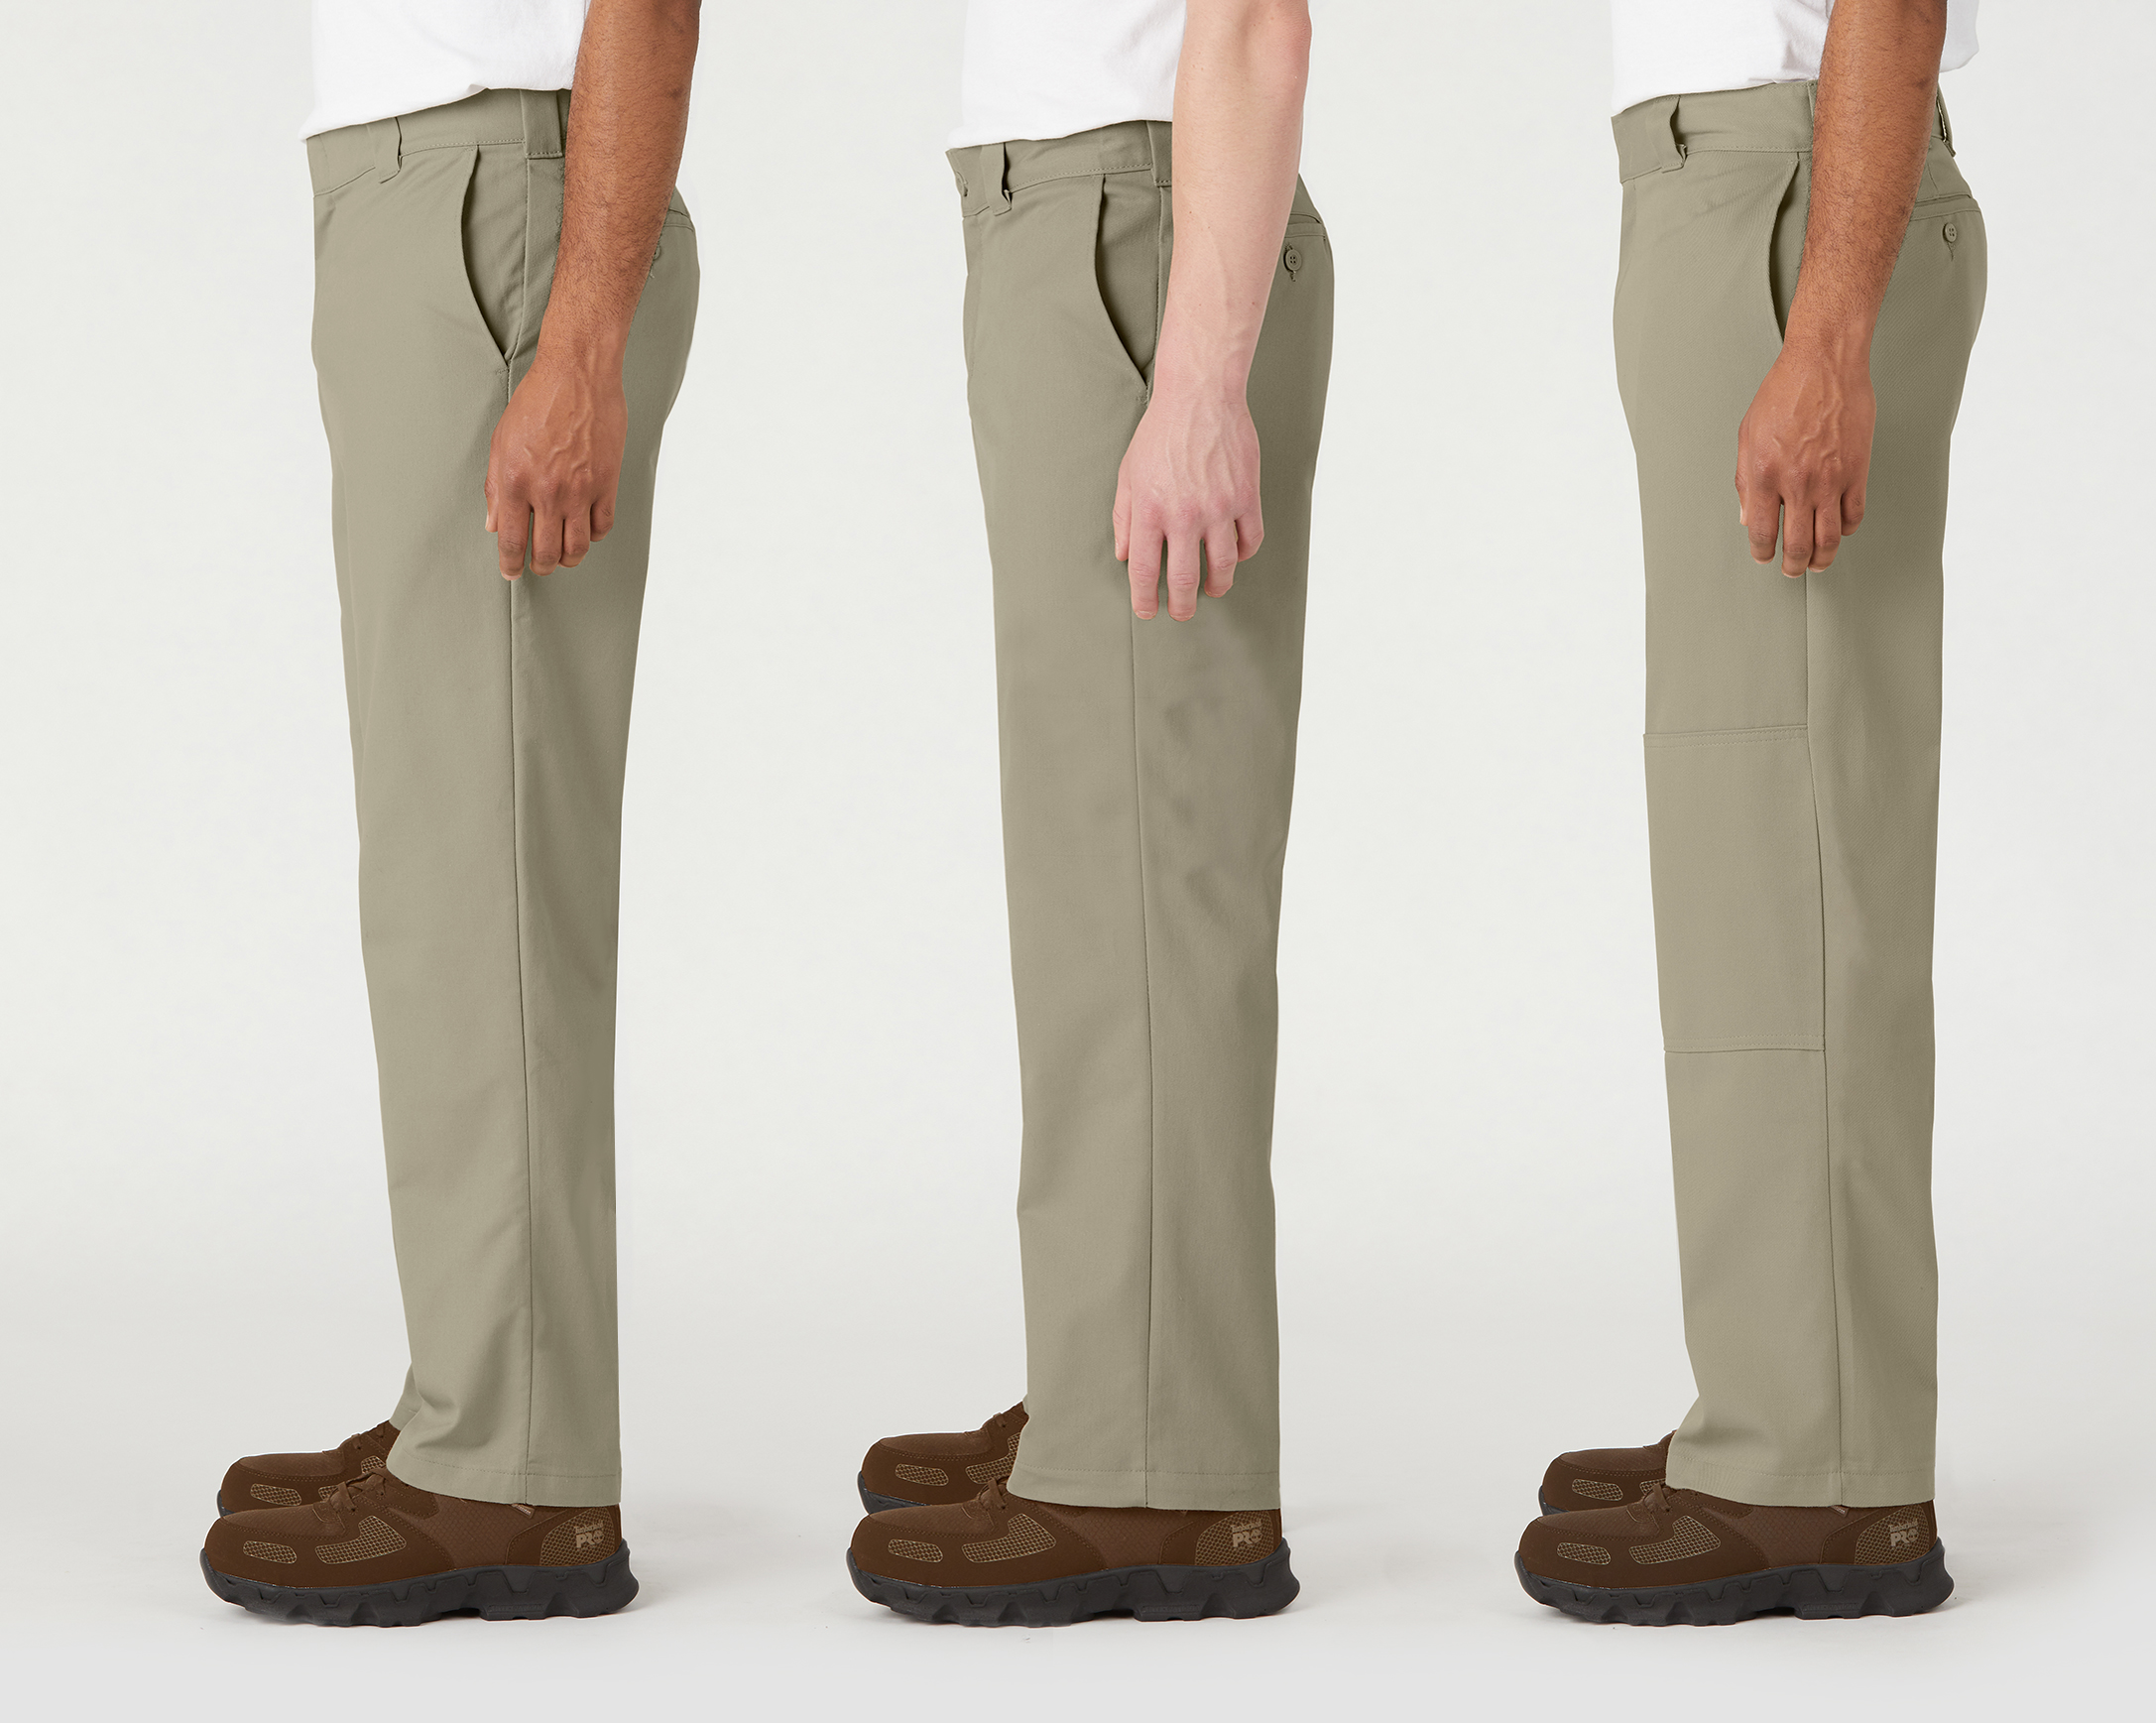 Blue Womens Trousers Dickies Vancleve Work Pant in Navy Blue Slacks and Chinos Dickies Trousers Slacks and Chinos 